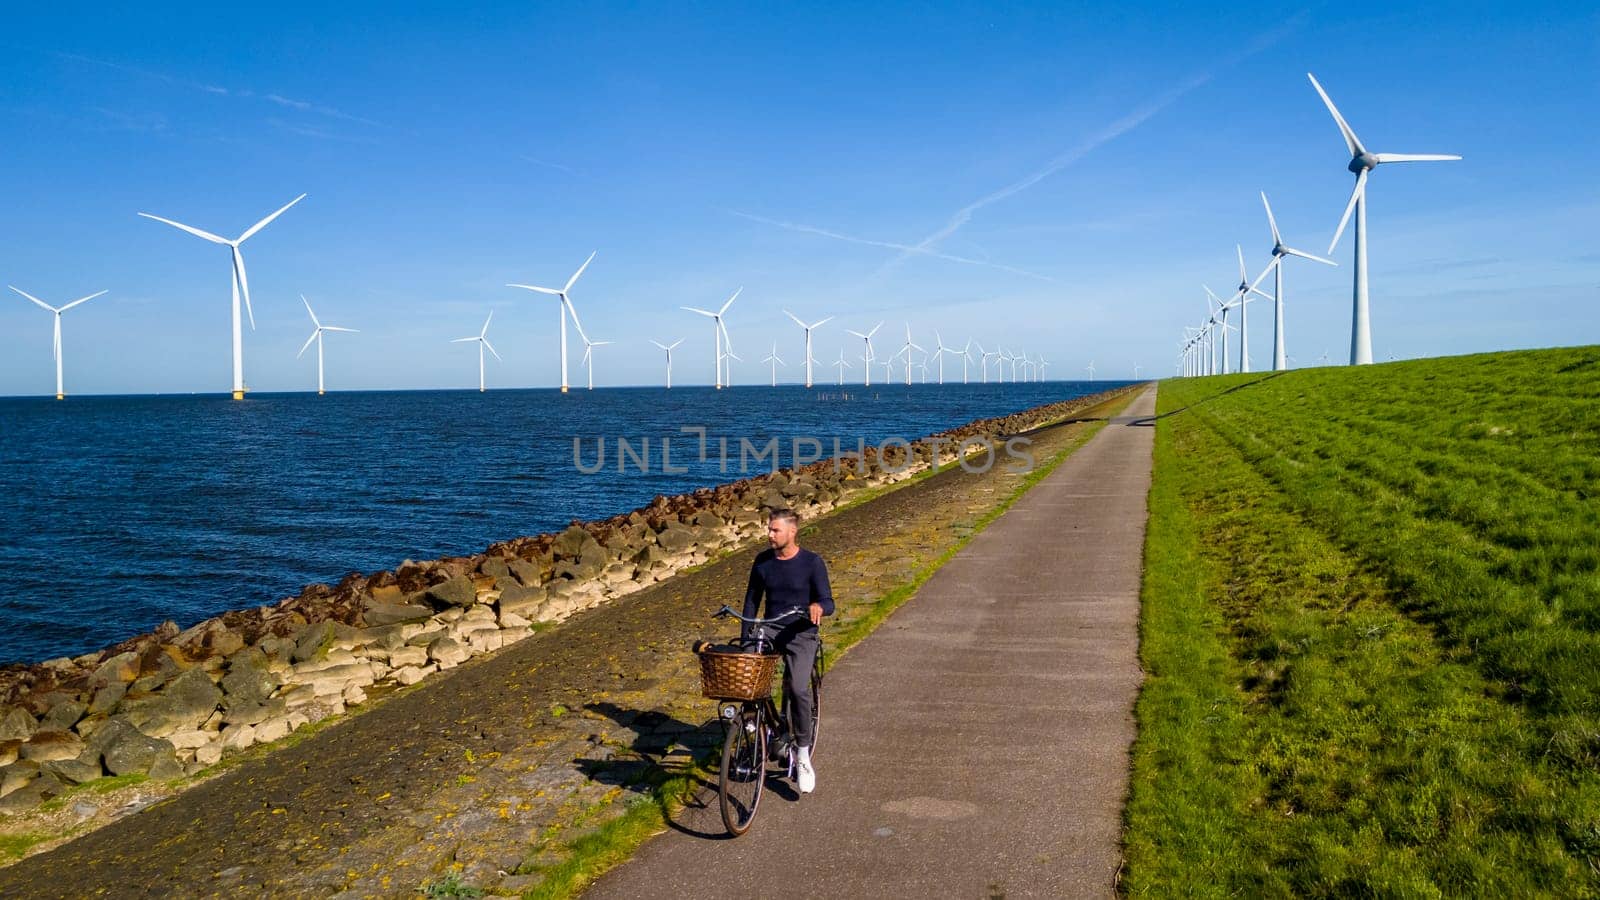 A man rides an electric bike along a path next to a tranquil body of water in the scenic landscape of Netherlands Flevoland in Spring. men riding an electric bike with windmills on the background